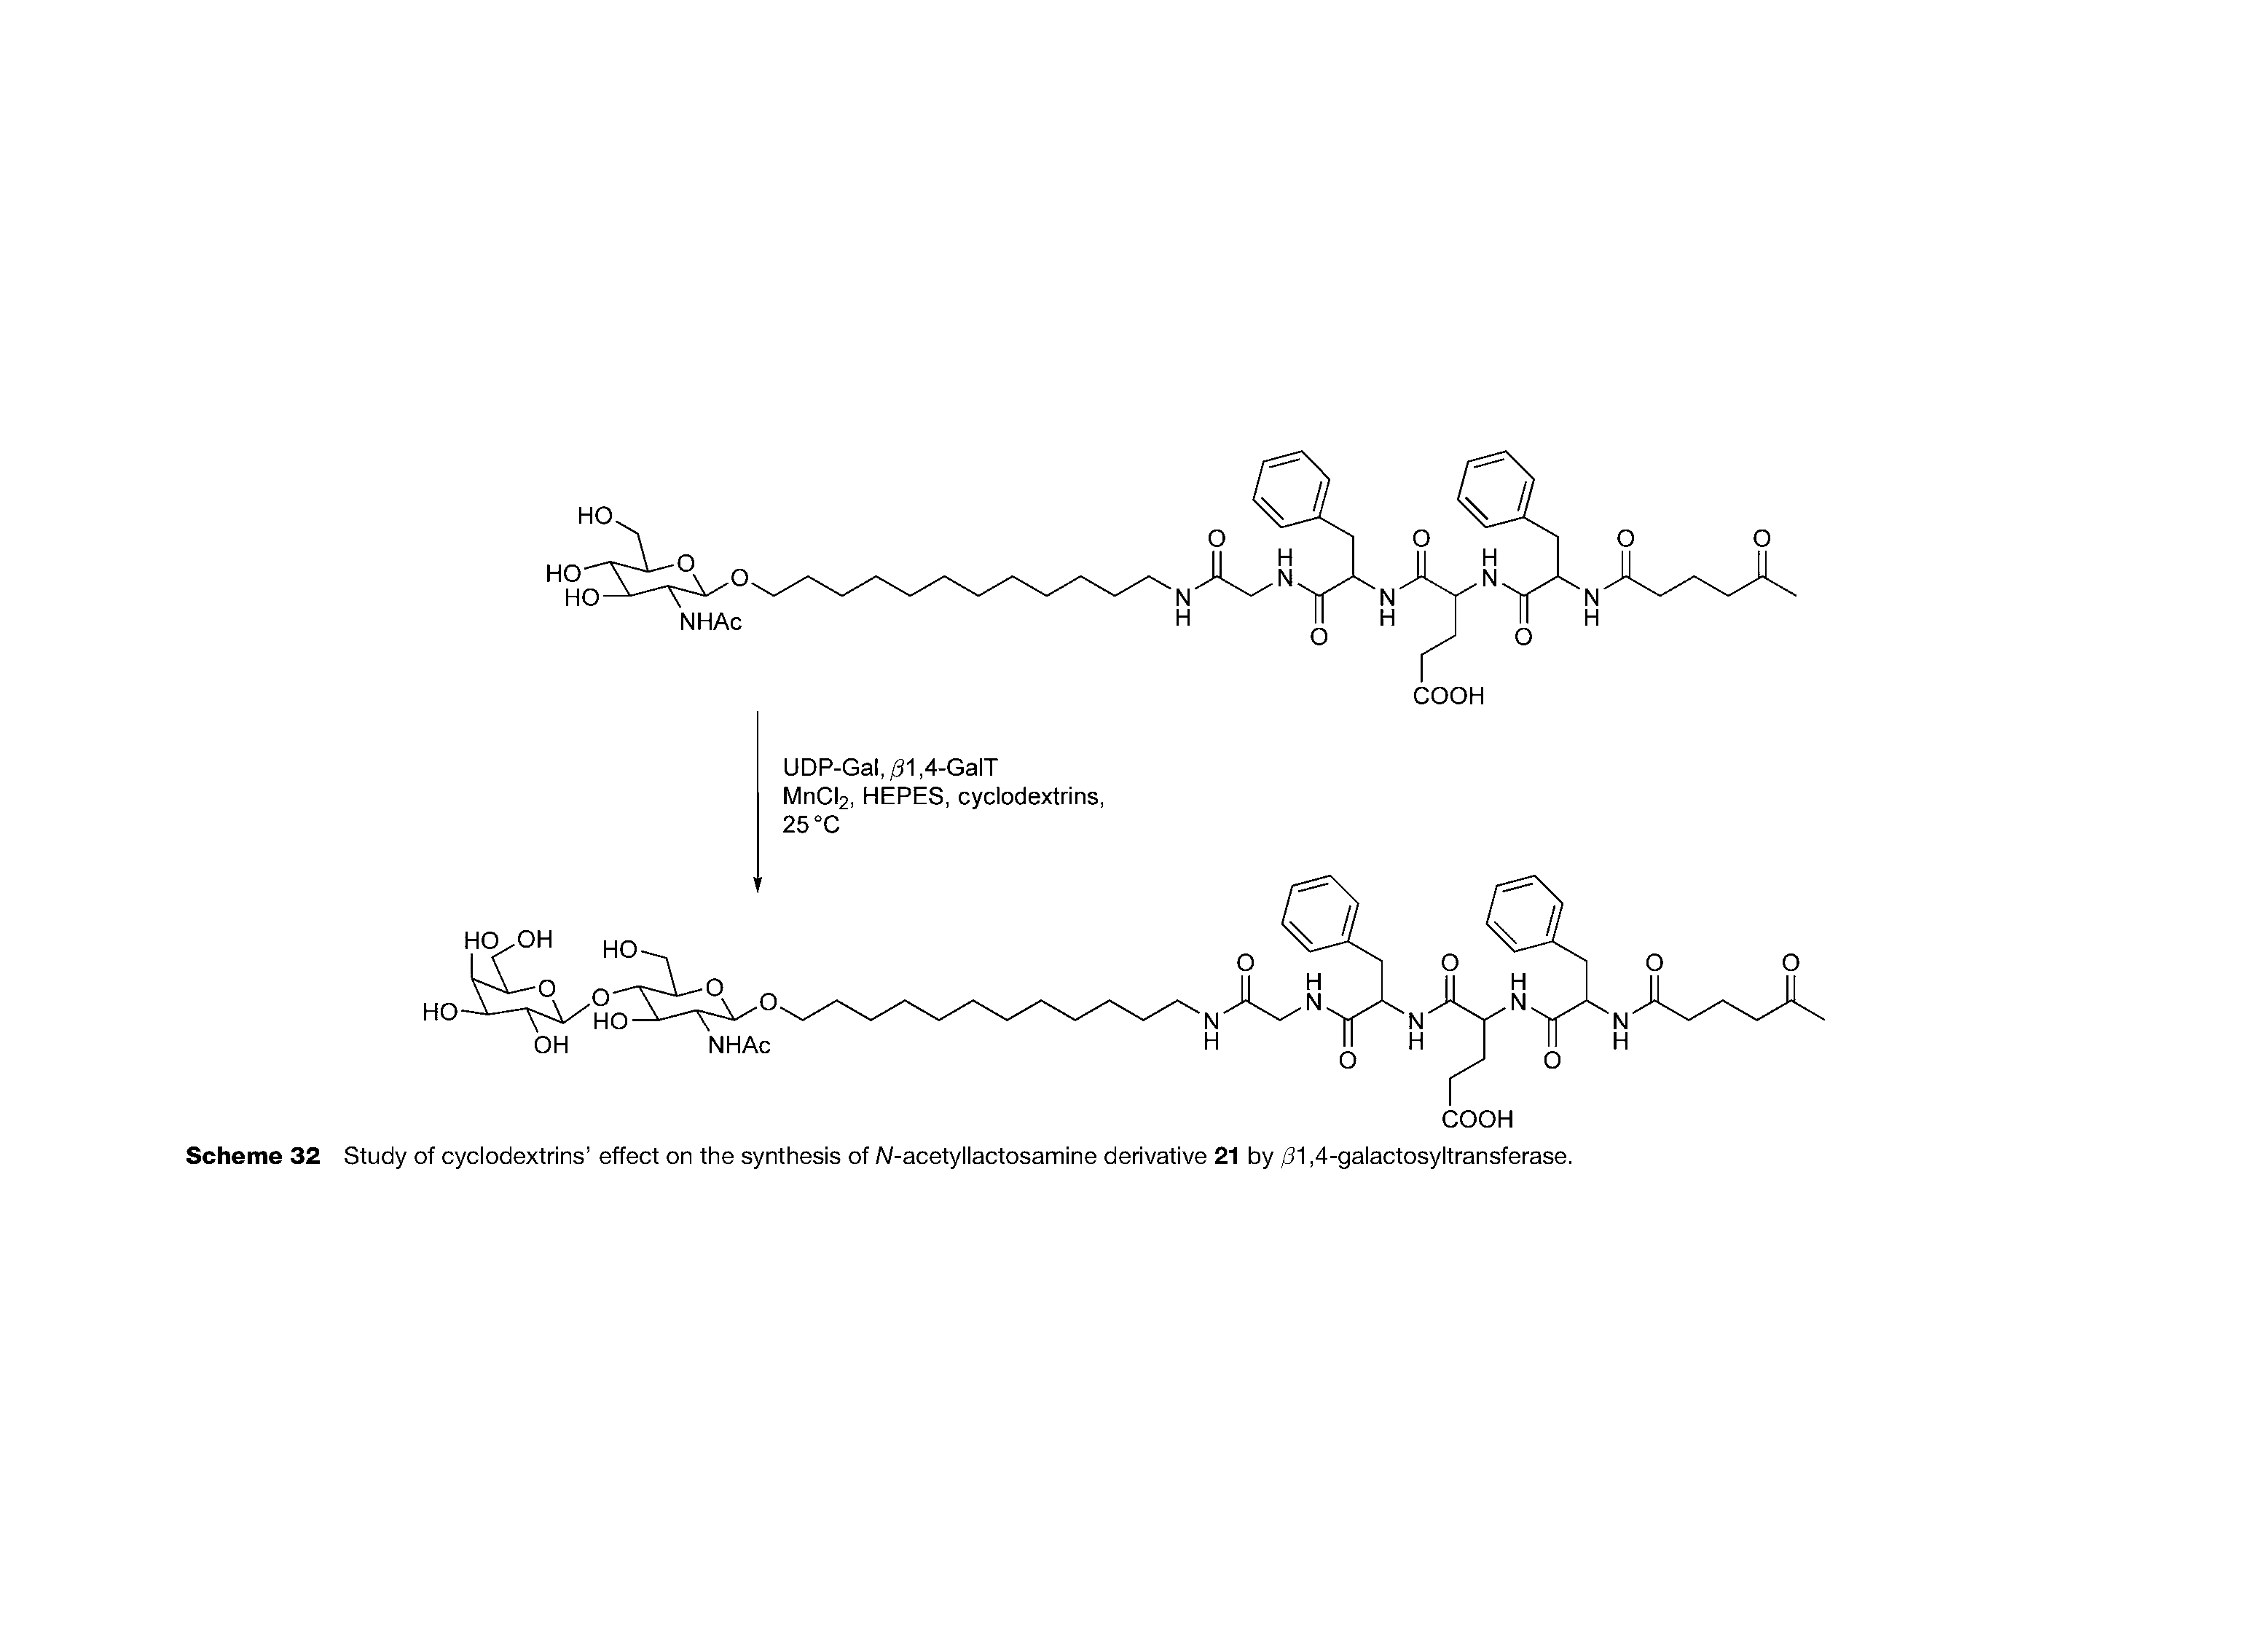 Scheme 32 Study of cyclodextrins effect on the synthesis of W-acetyllactosamine derivative 21 by /31,4-galactosyltransferase.